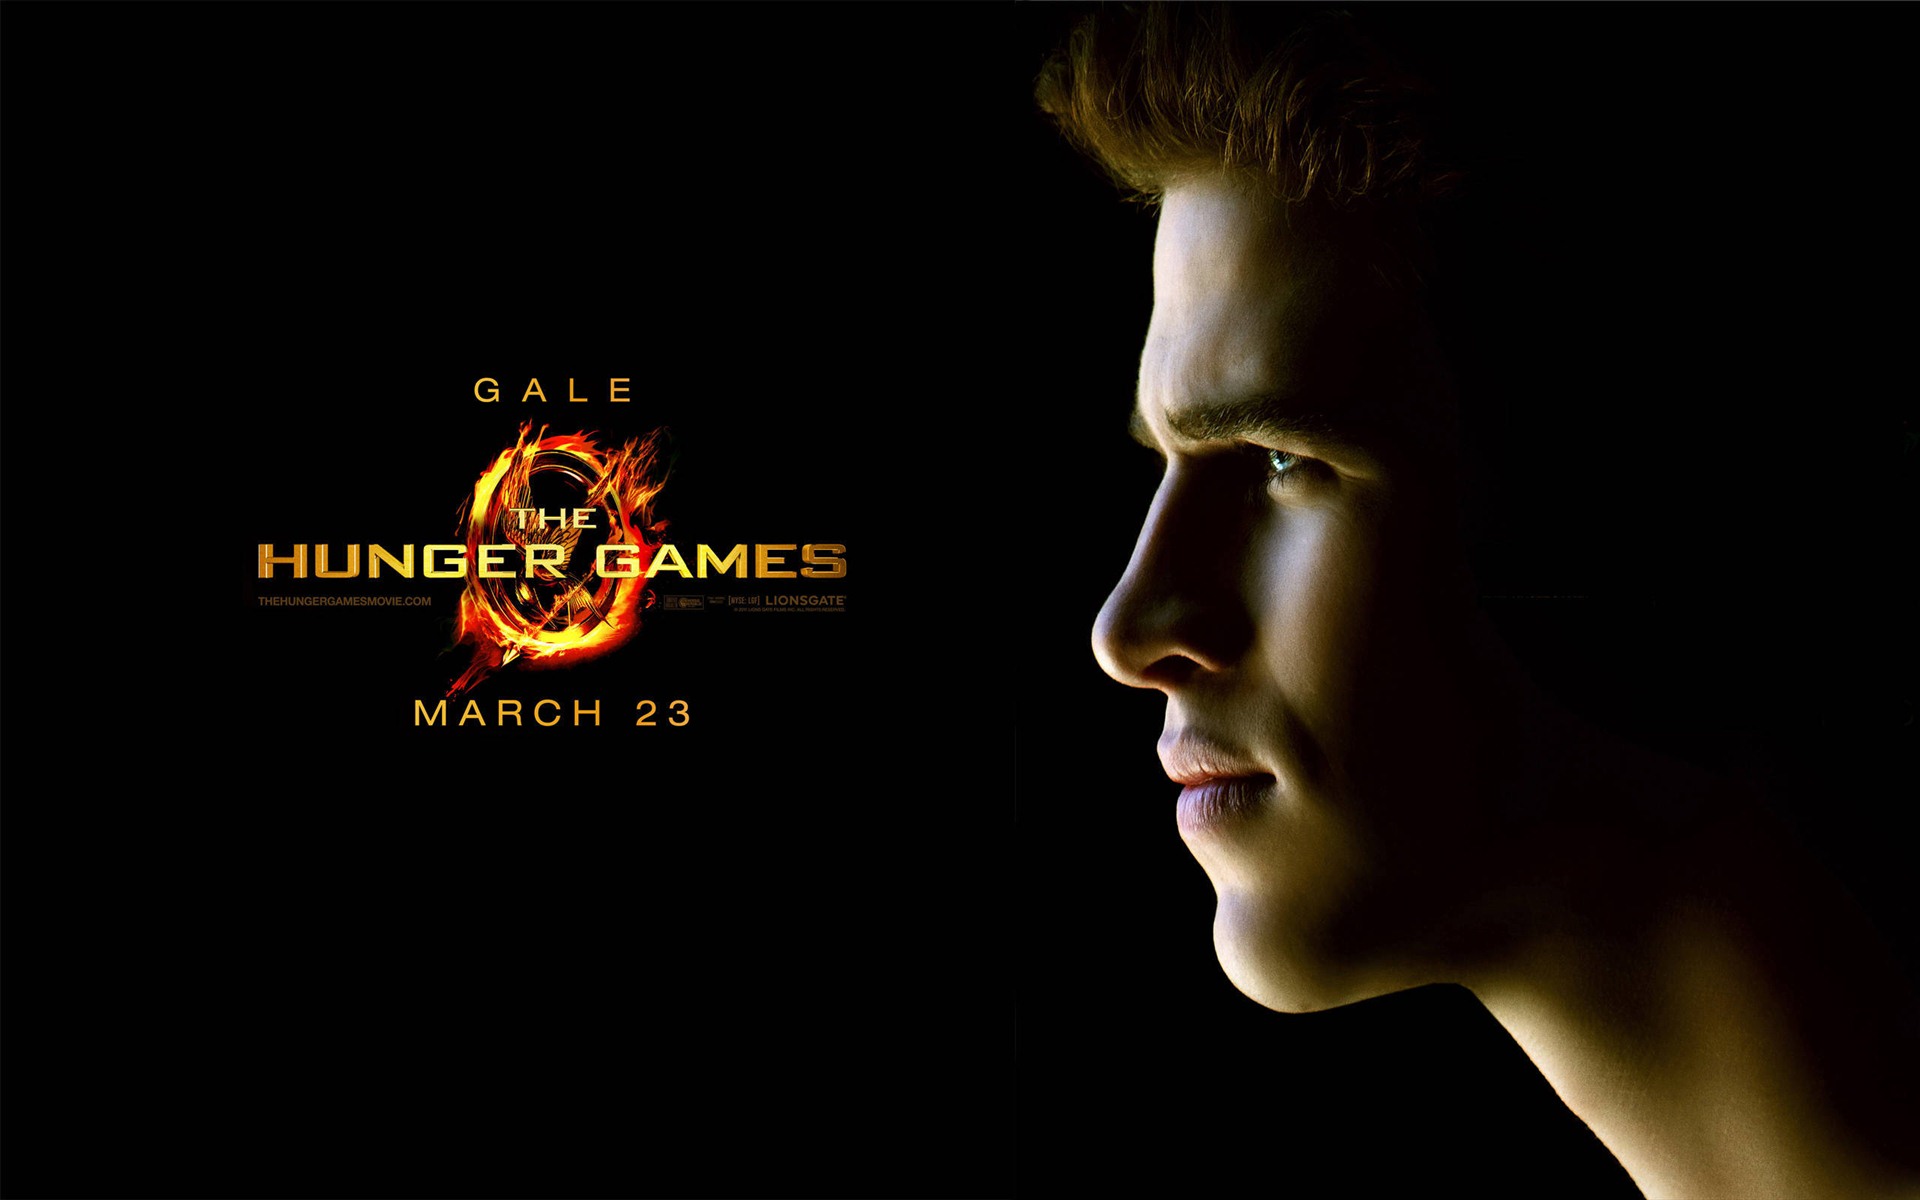 The Hunger Games HD wallpapers #4 - 1920x1200